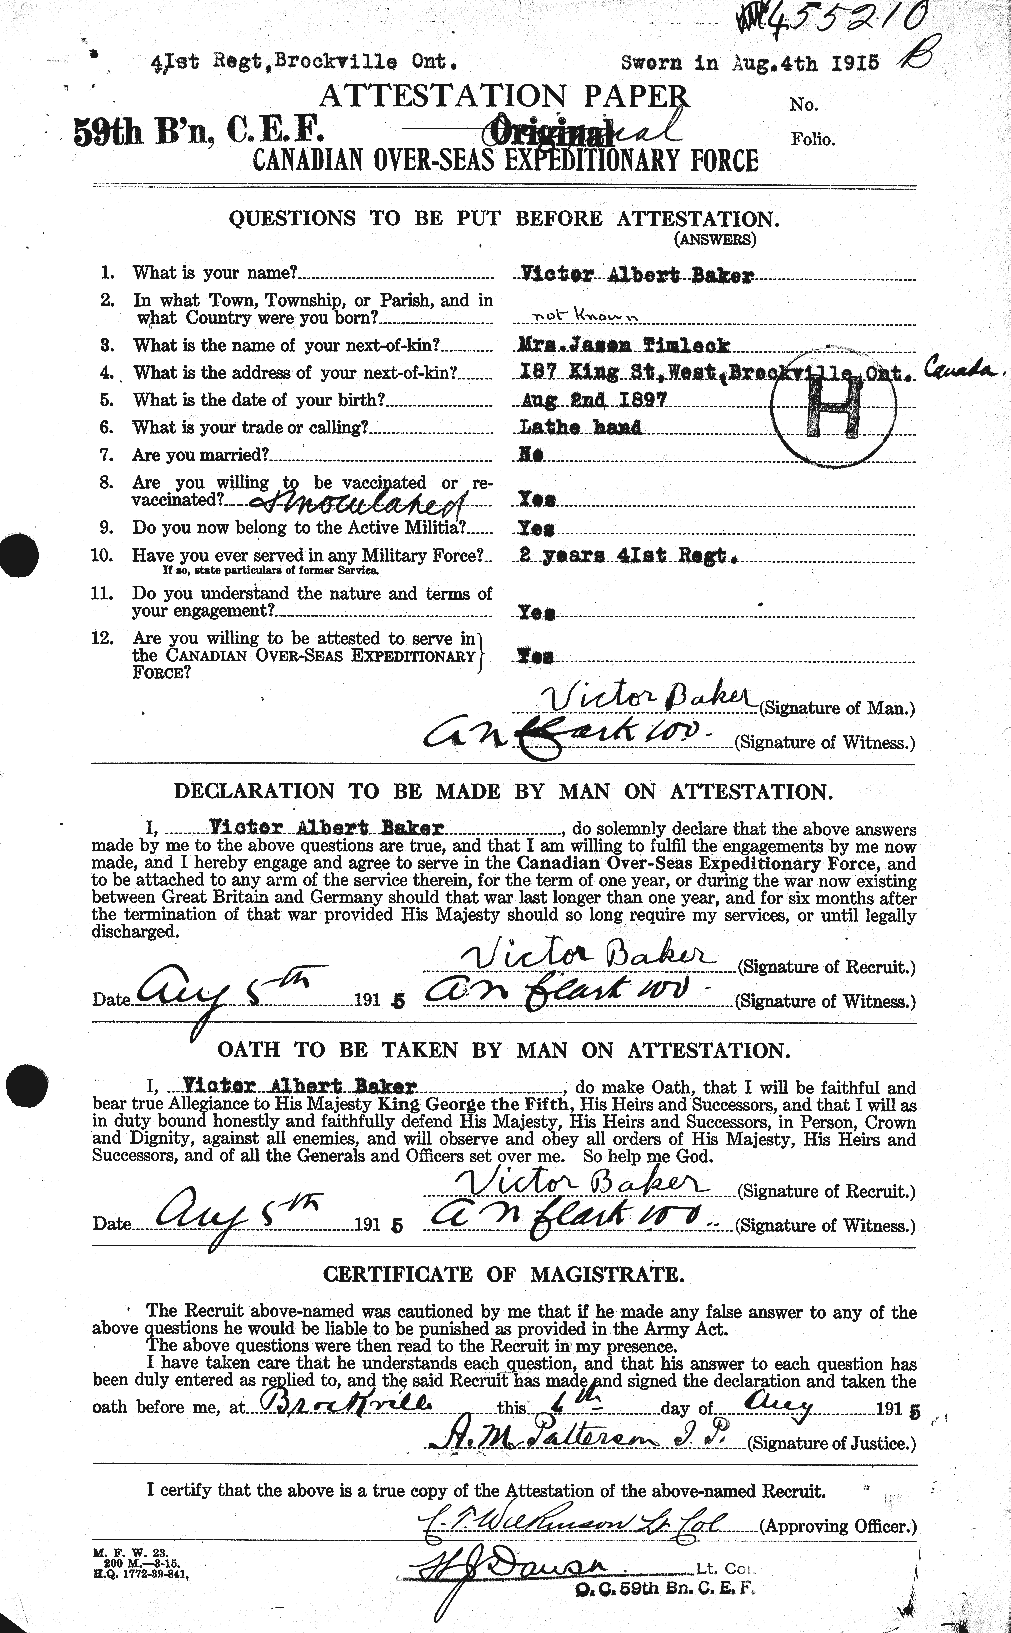 Personnel Records of the First World War - CEF 221433a